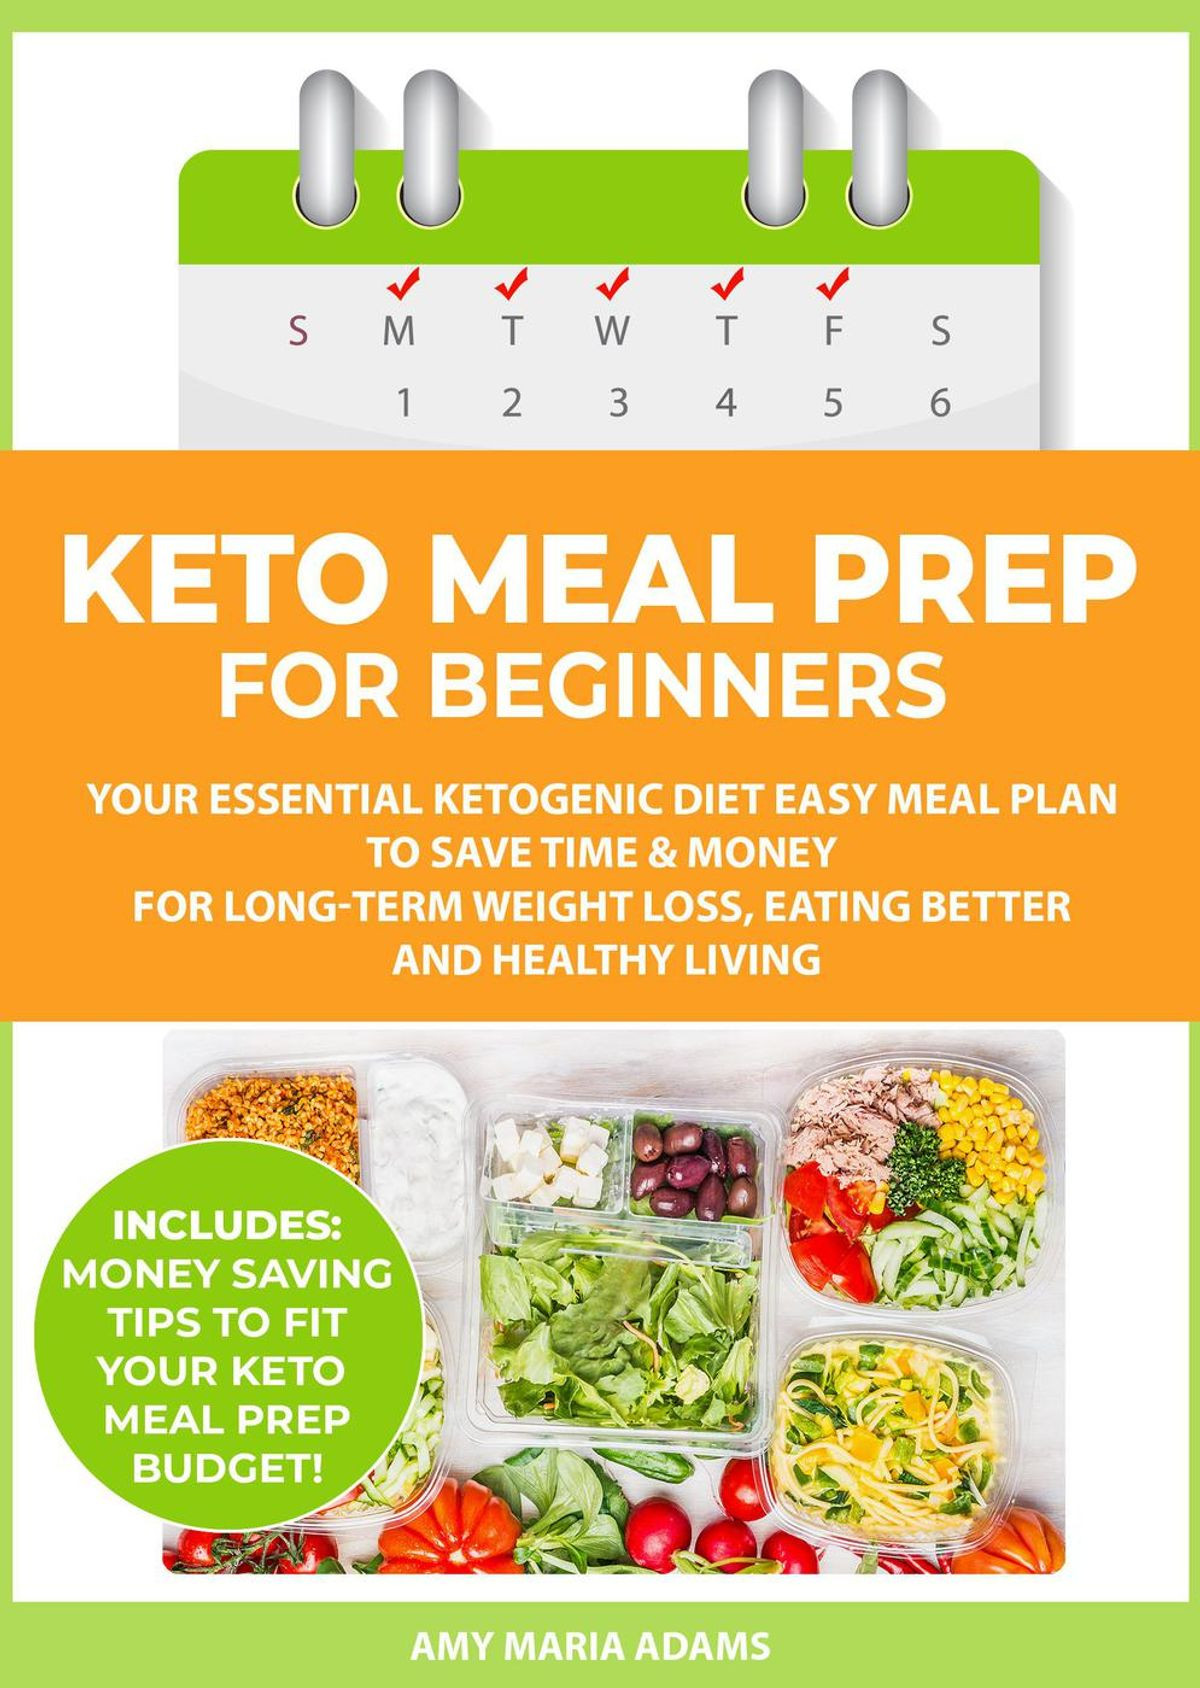 Keto For Beginners Meal Plan
 Keto Meal Prep for Beginners Your Essential Ketogenic